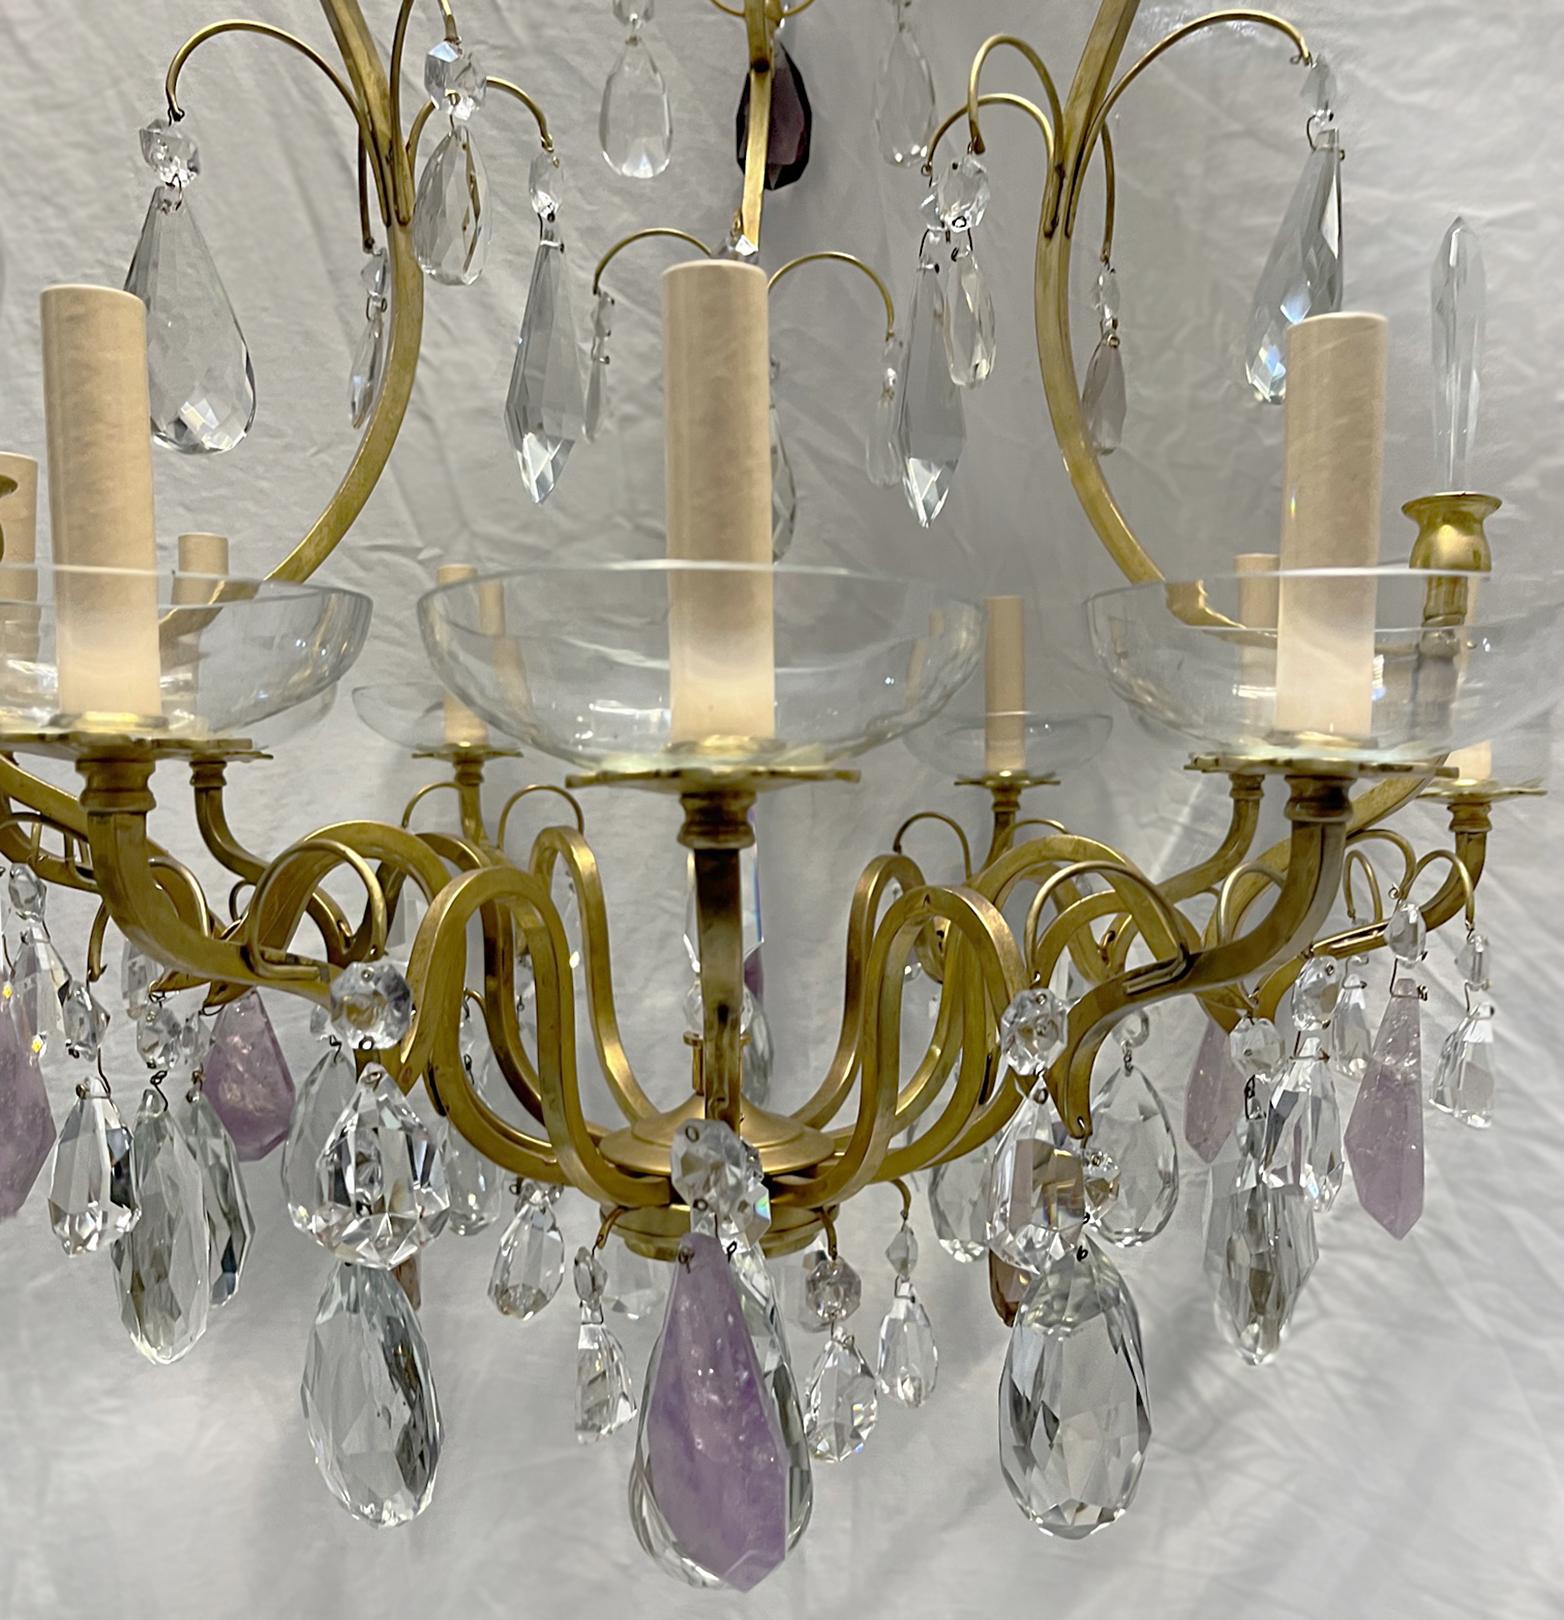 A circa 1920's French gilt bronze chandelier with 9 lights, with amethyst rock crystal pendants.

Measurements:
Diameter: 30